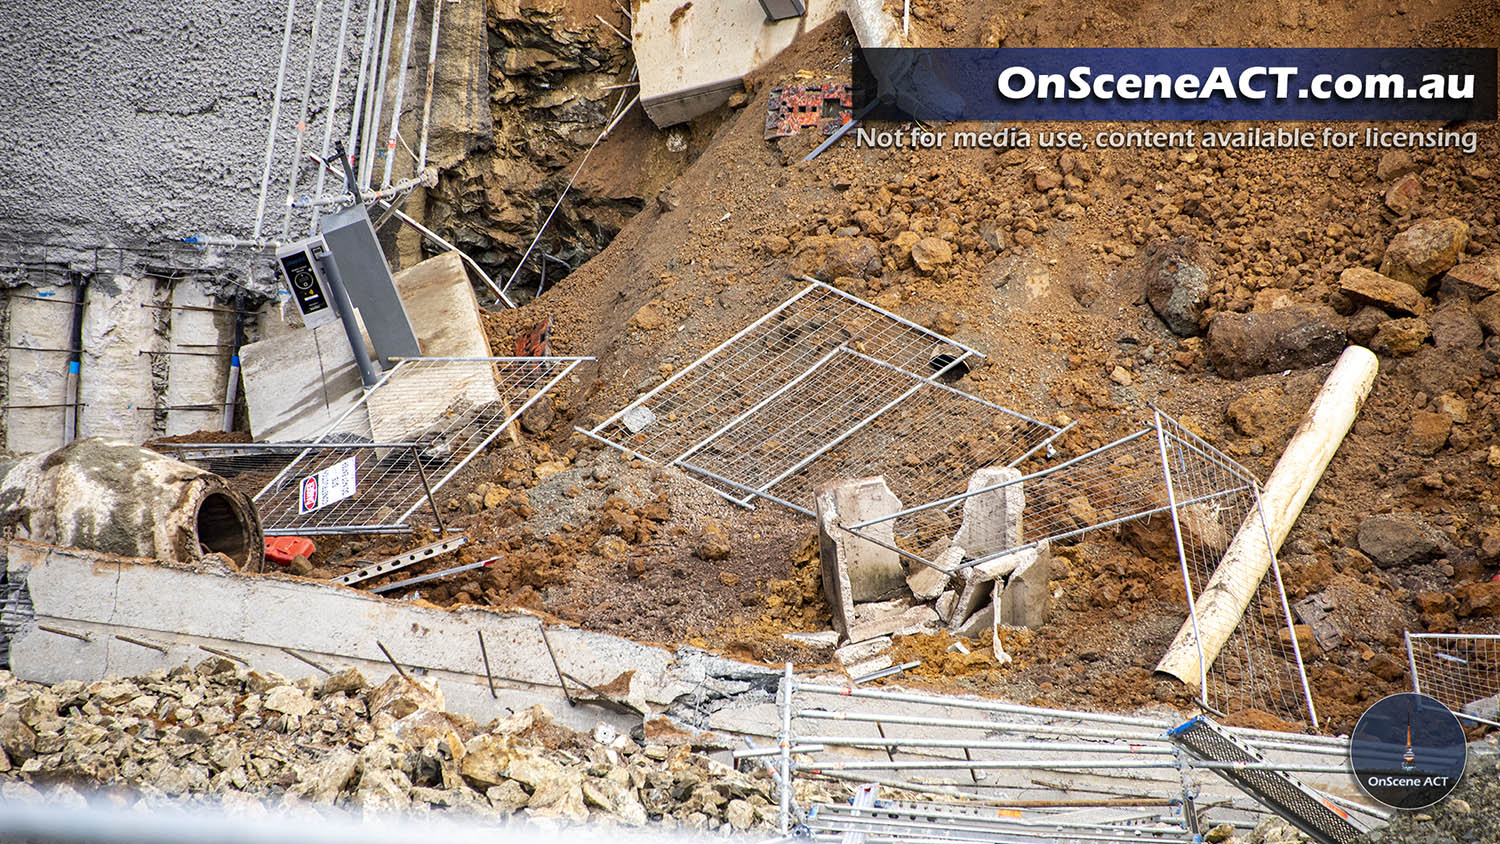 20220806 1500 woden structure collapse image 7